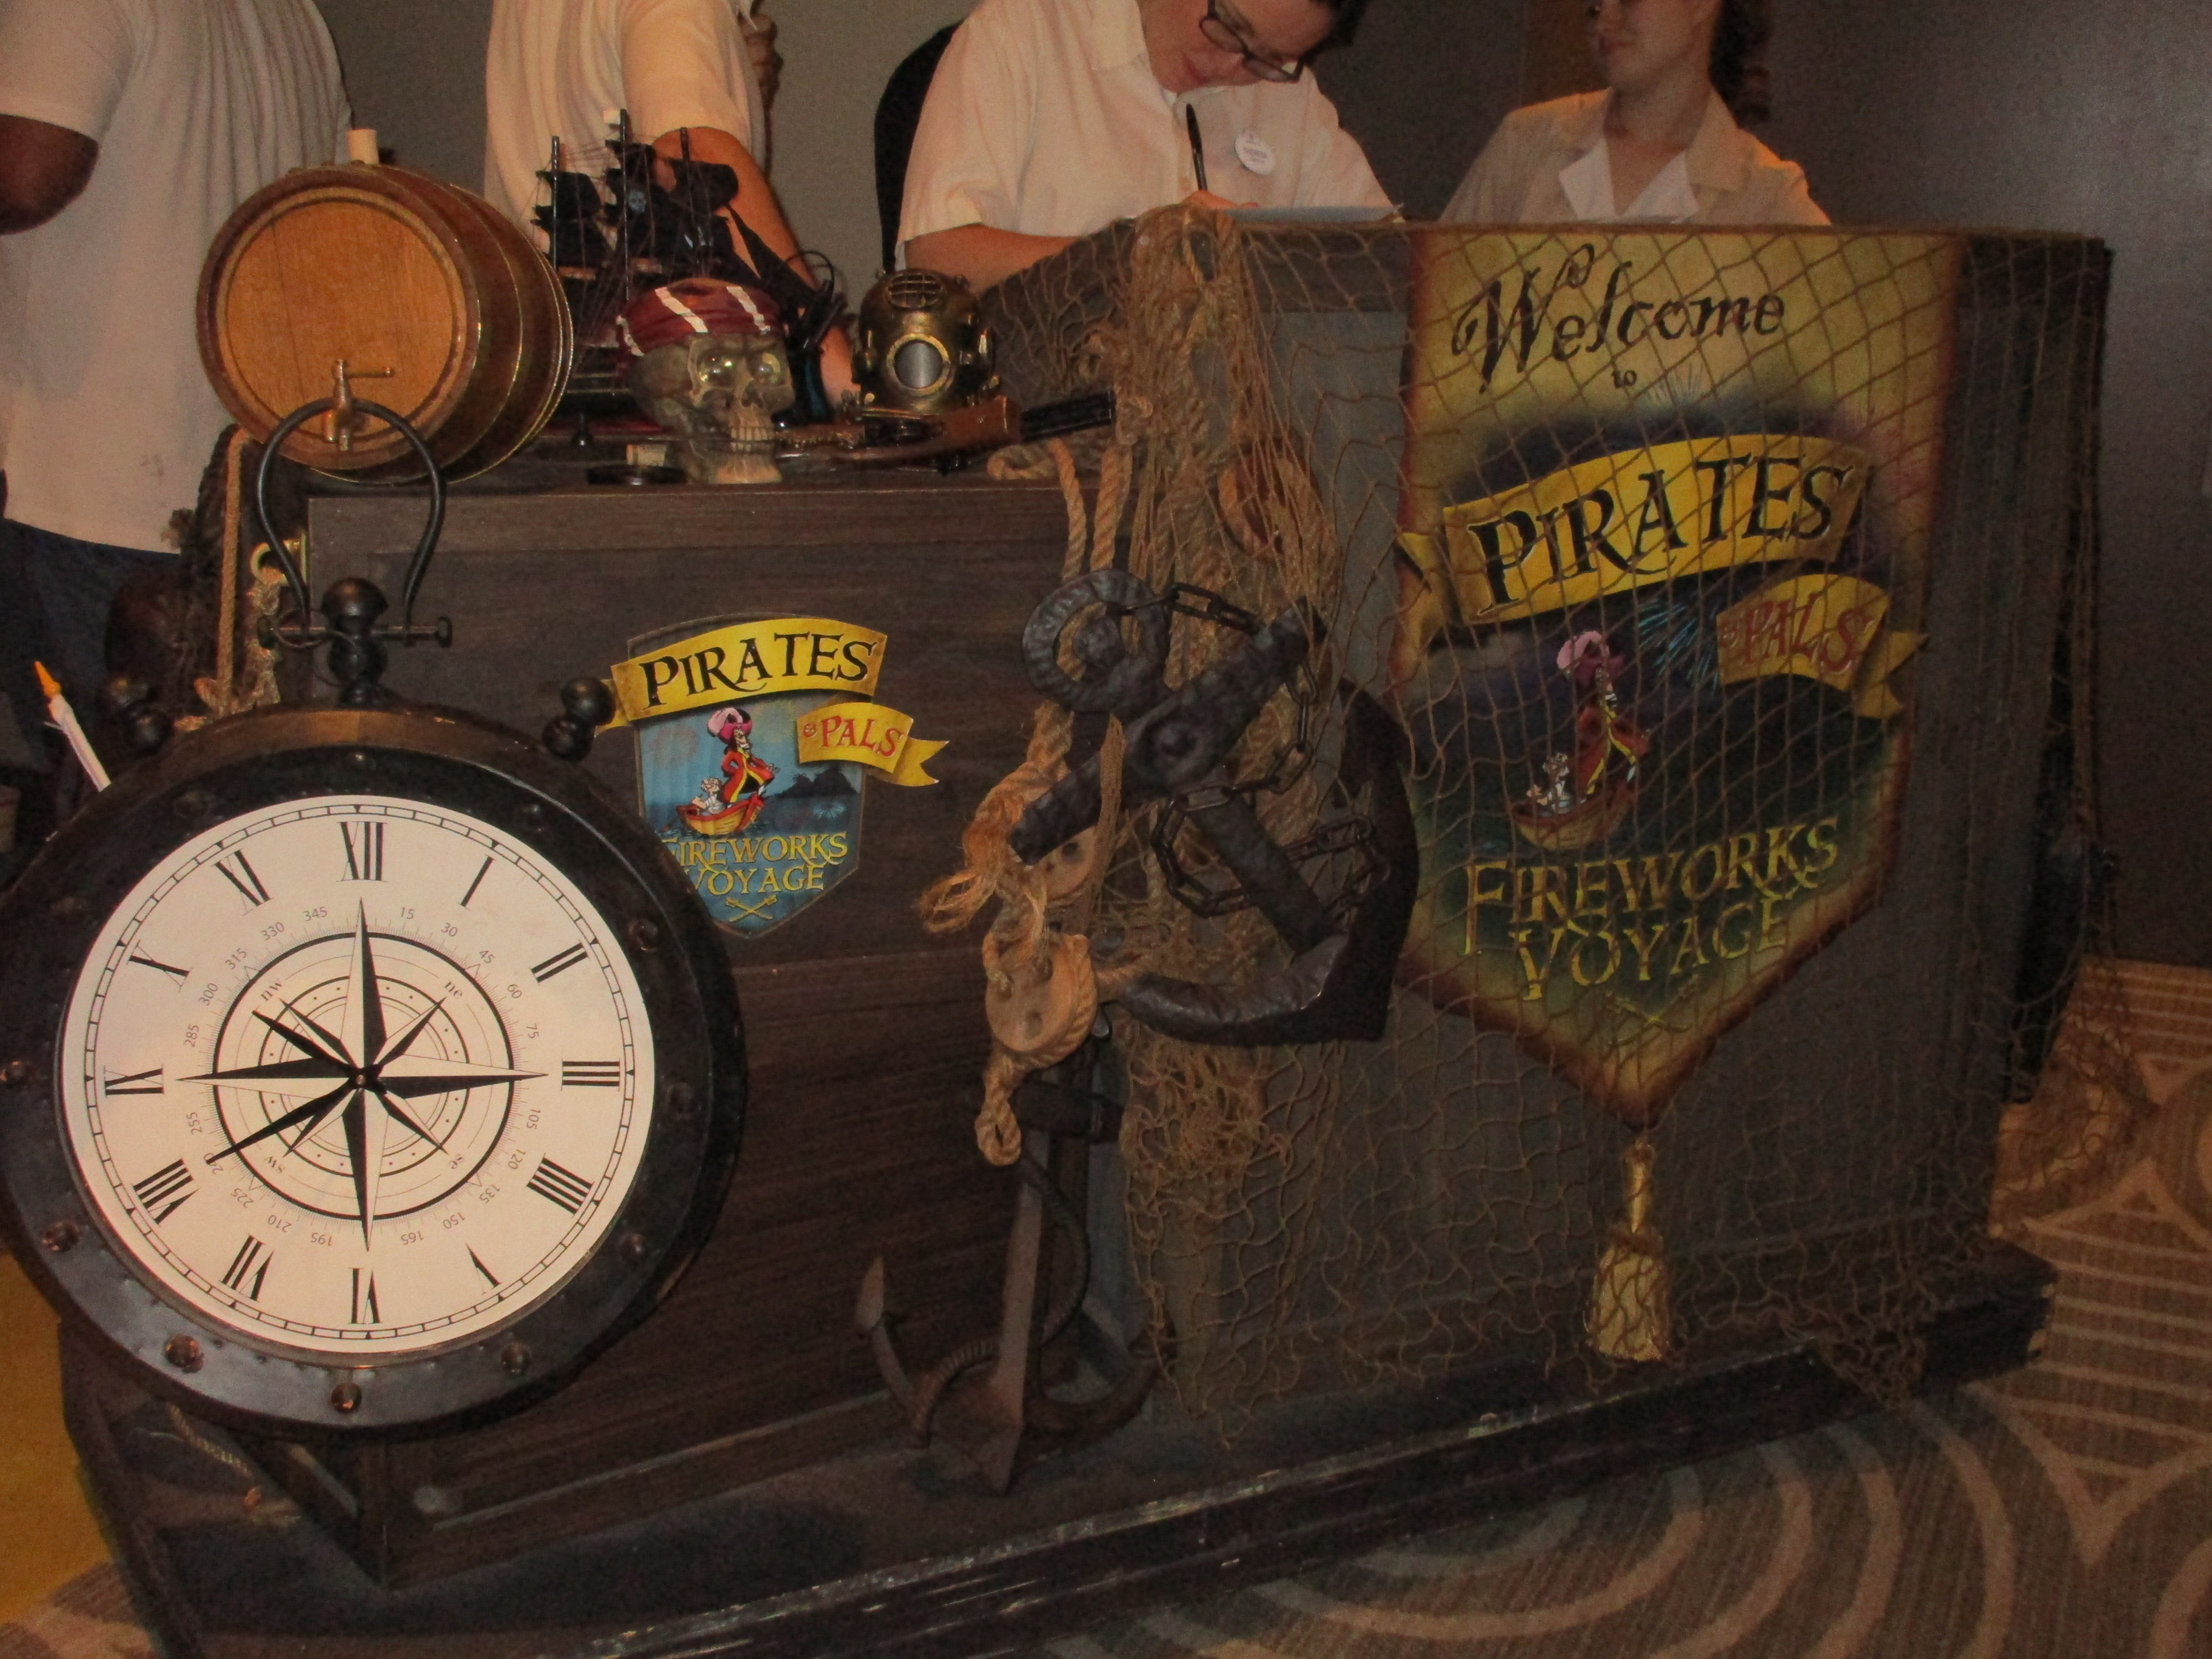 Disney’s Pirates and Pals Fireworks Voyage: A Review